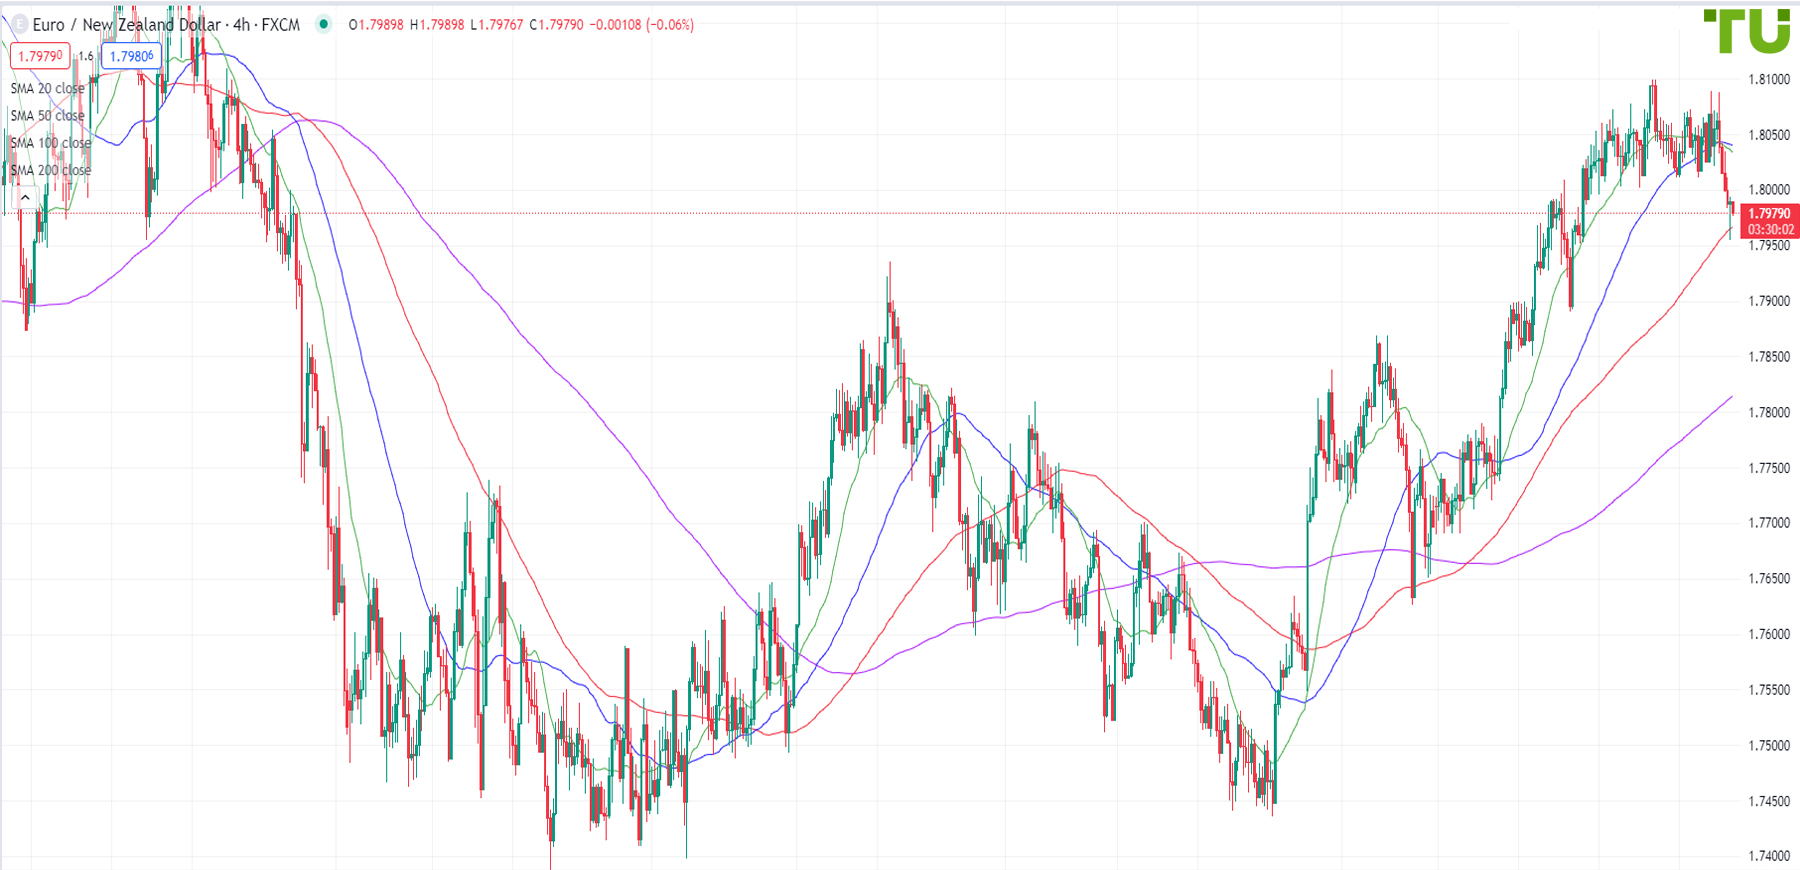 Euro/Kiwi broke the support and continues to decline